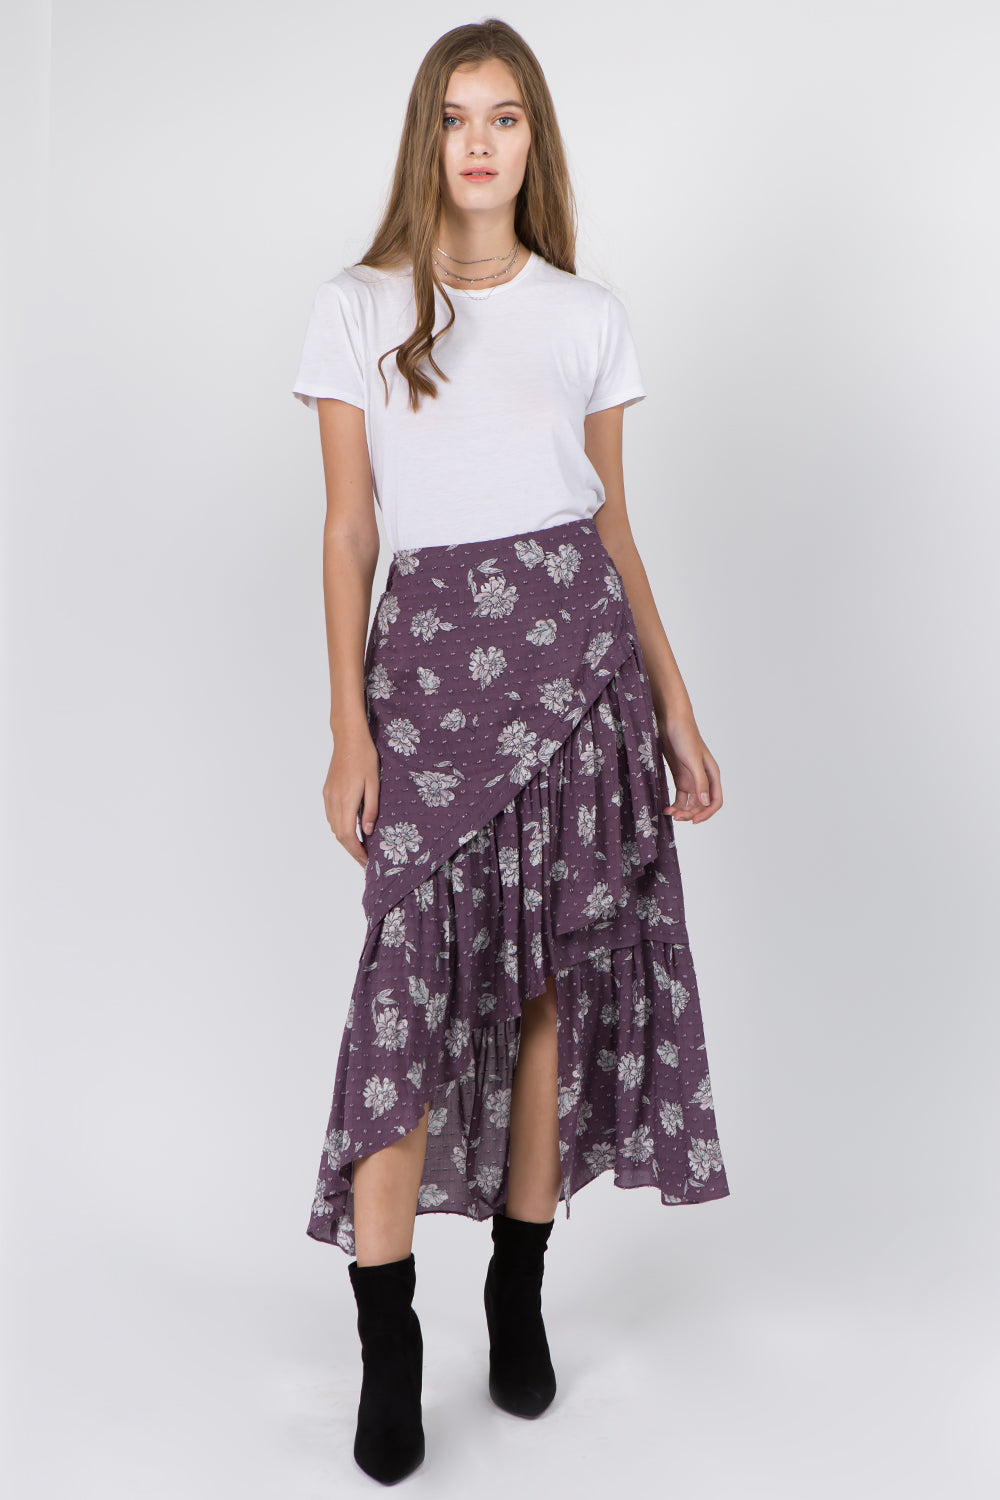 Floral Ruffle Tiered Faux Wrap Skirt - Whiteroom+Cactus